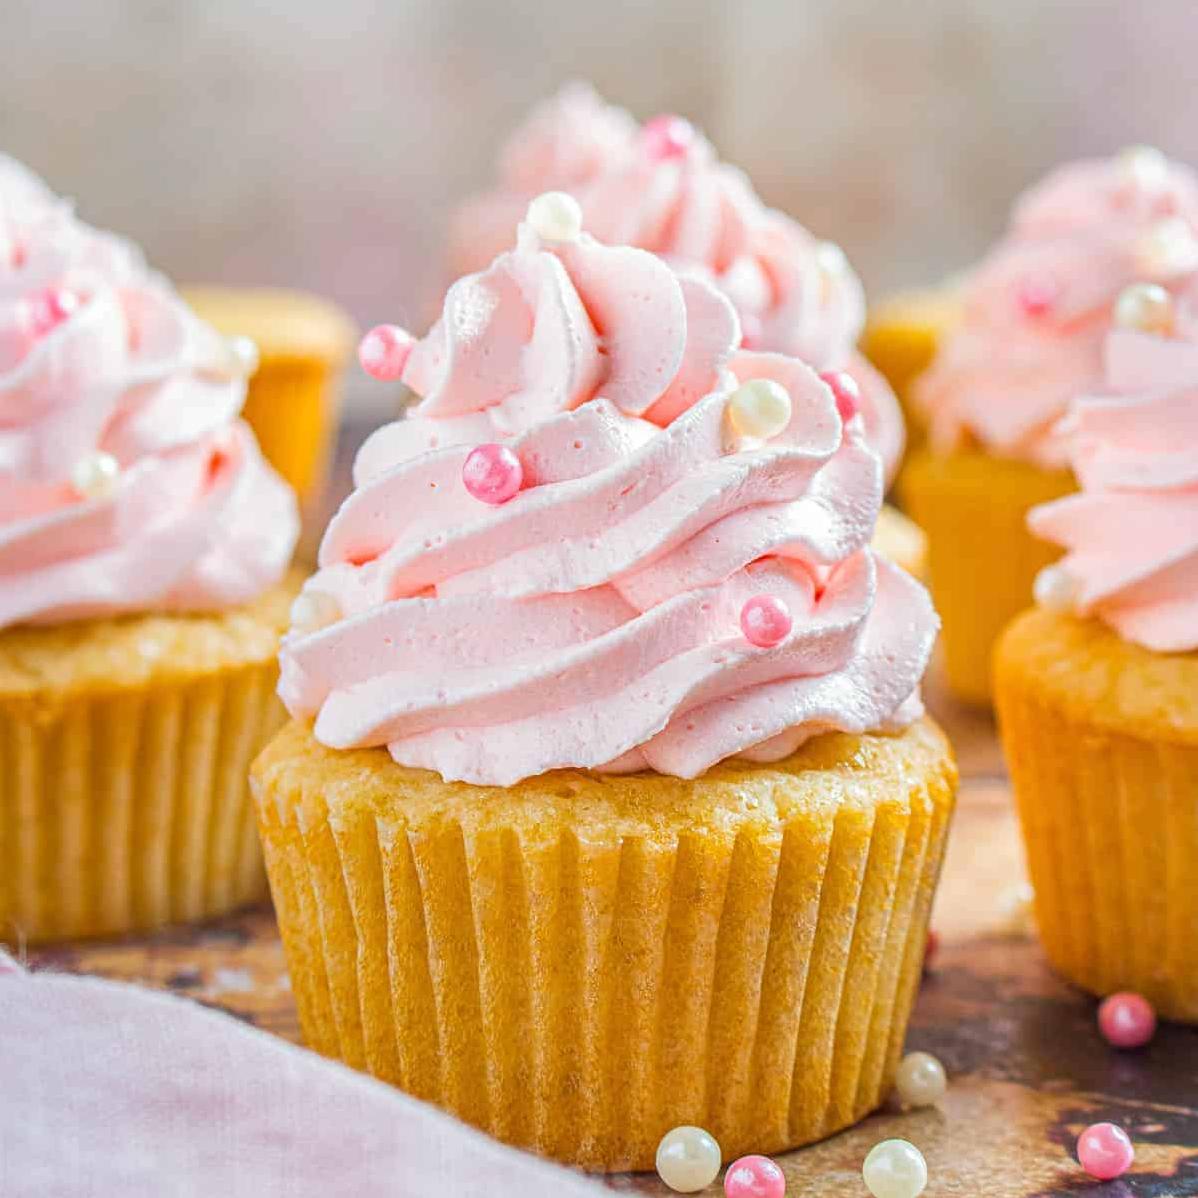  Celebrate any occasion with these adorable mini cupcakes.